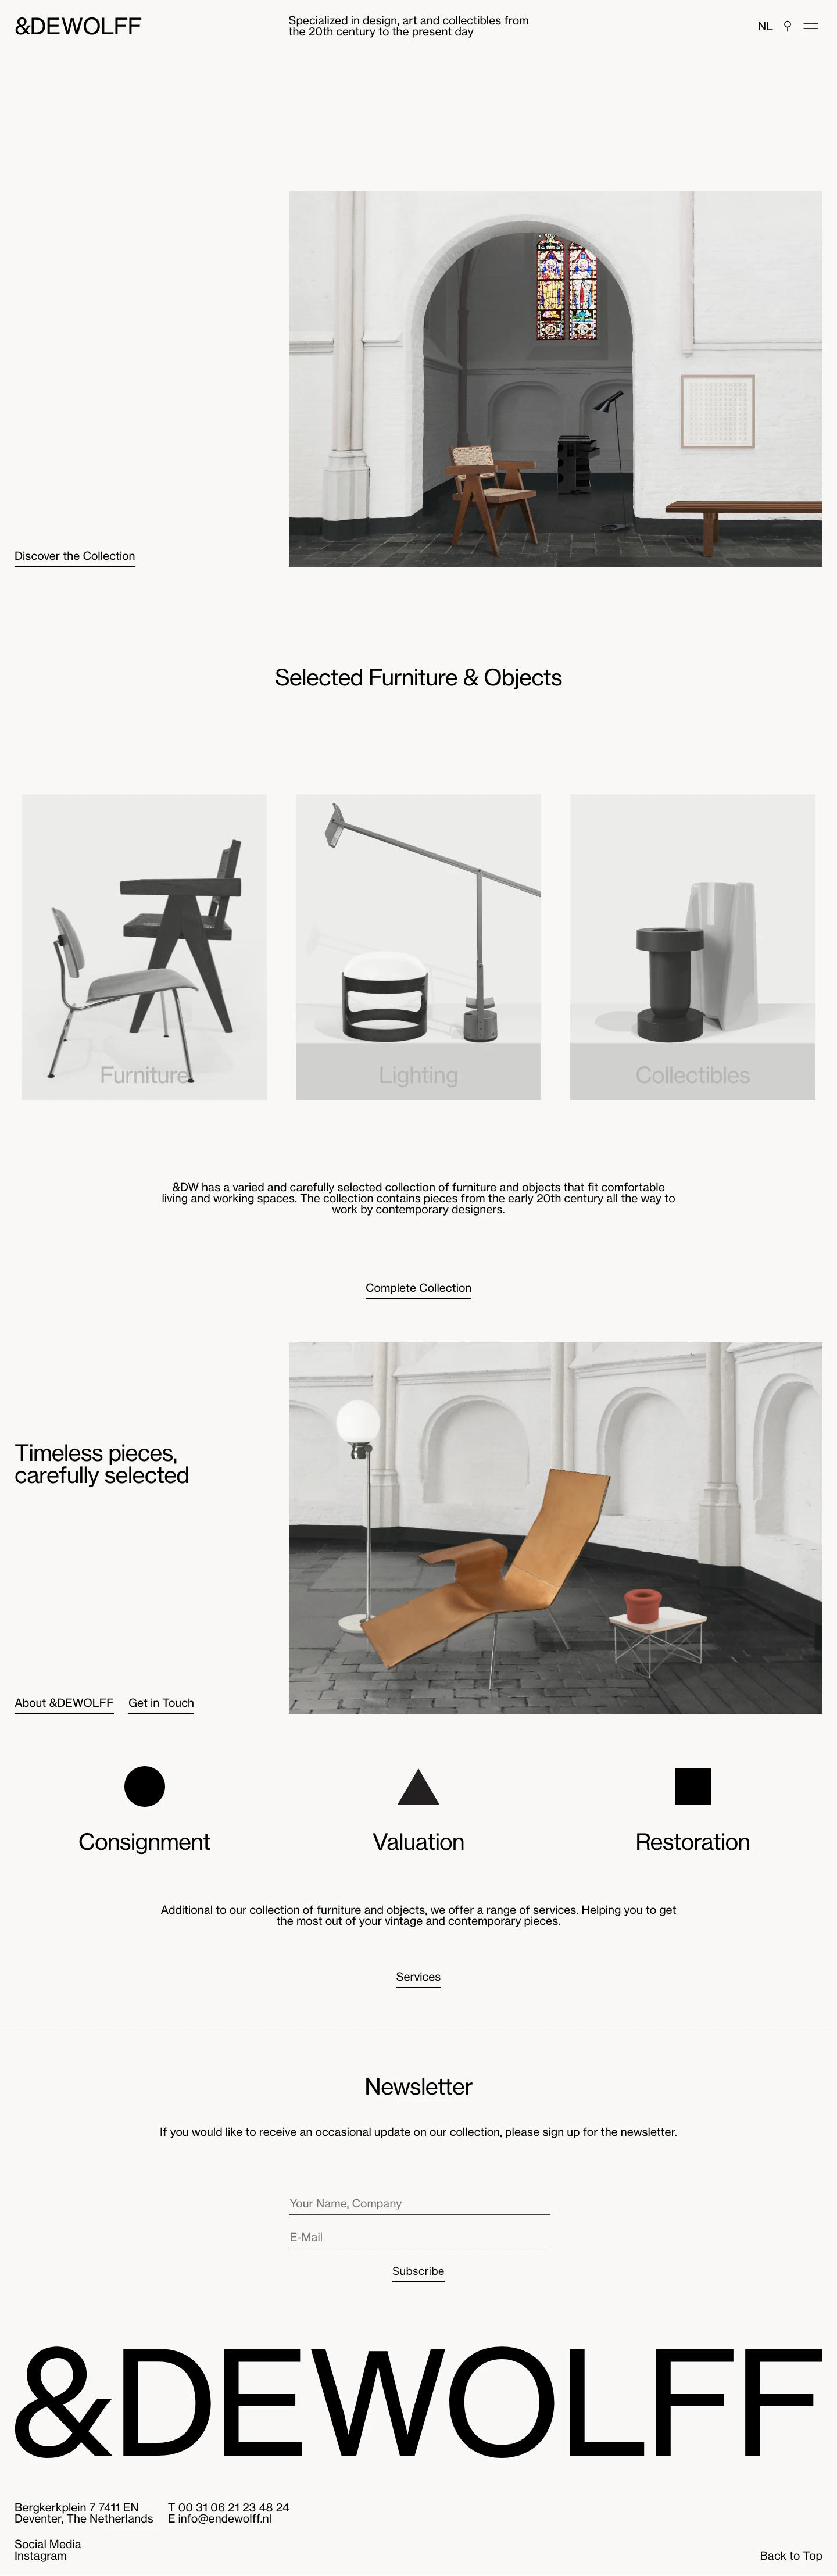 &DEWOLFF Landing Page Example: Specialized in design, art and collectibles from the 20th century to the present day.